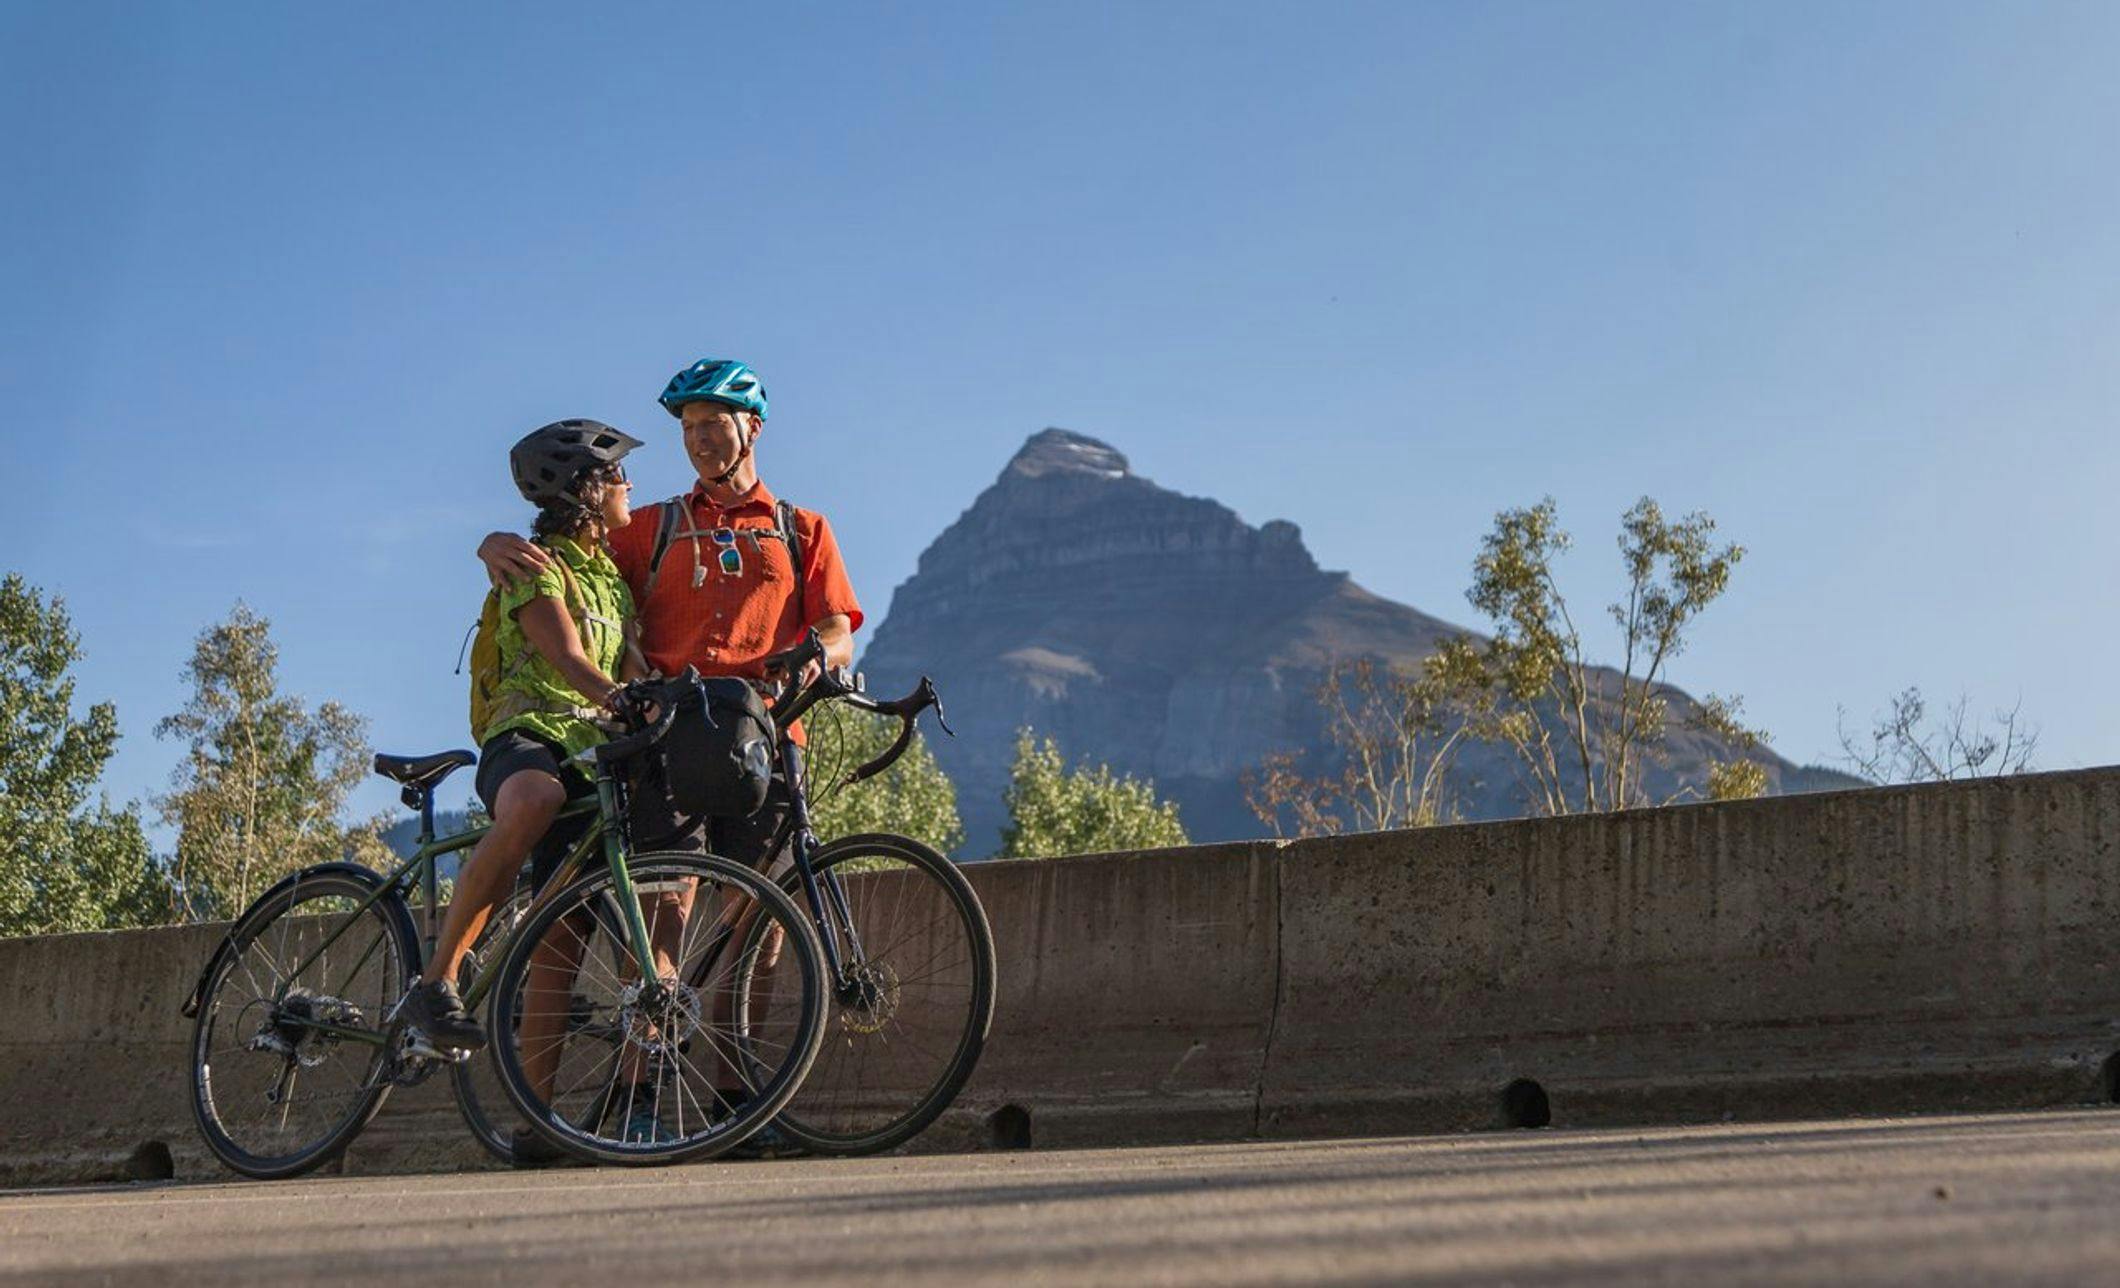 Two cyclists take a photo while riding the Bow Valley Parkway in Banff National Park.